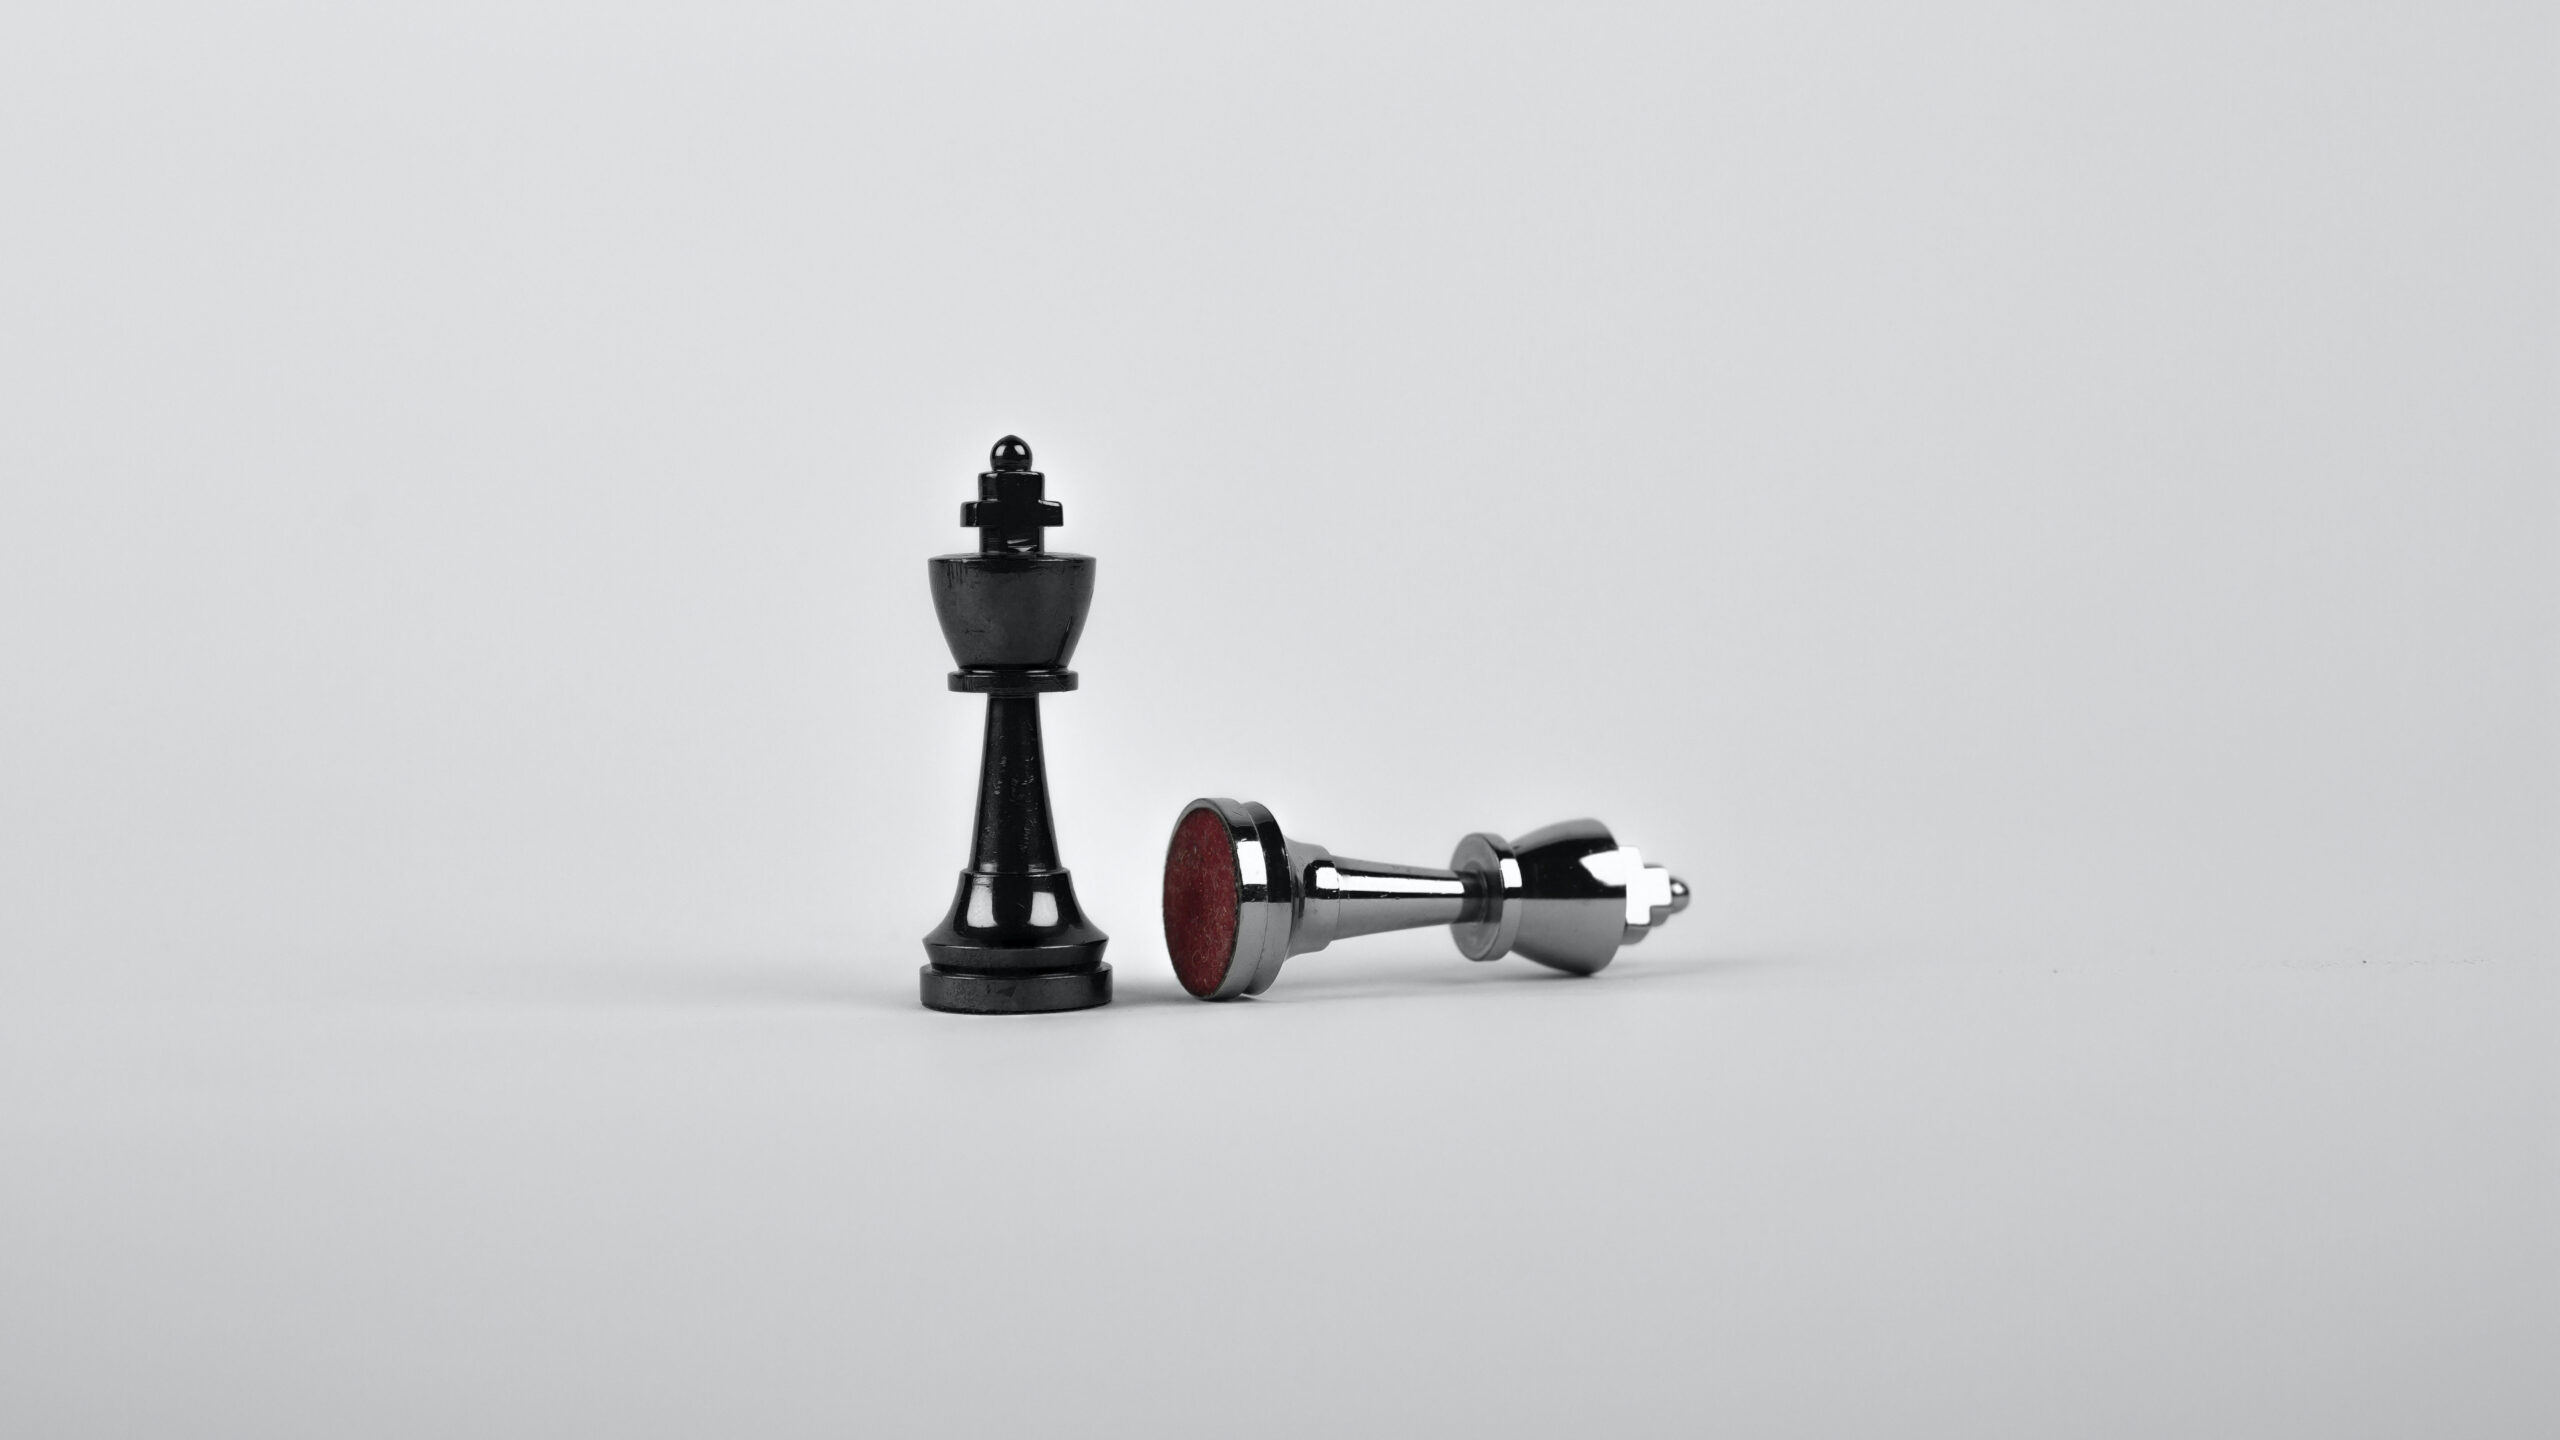 Two chess pieces in front of white background. Both are Kings, one is on its side, defeated.